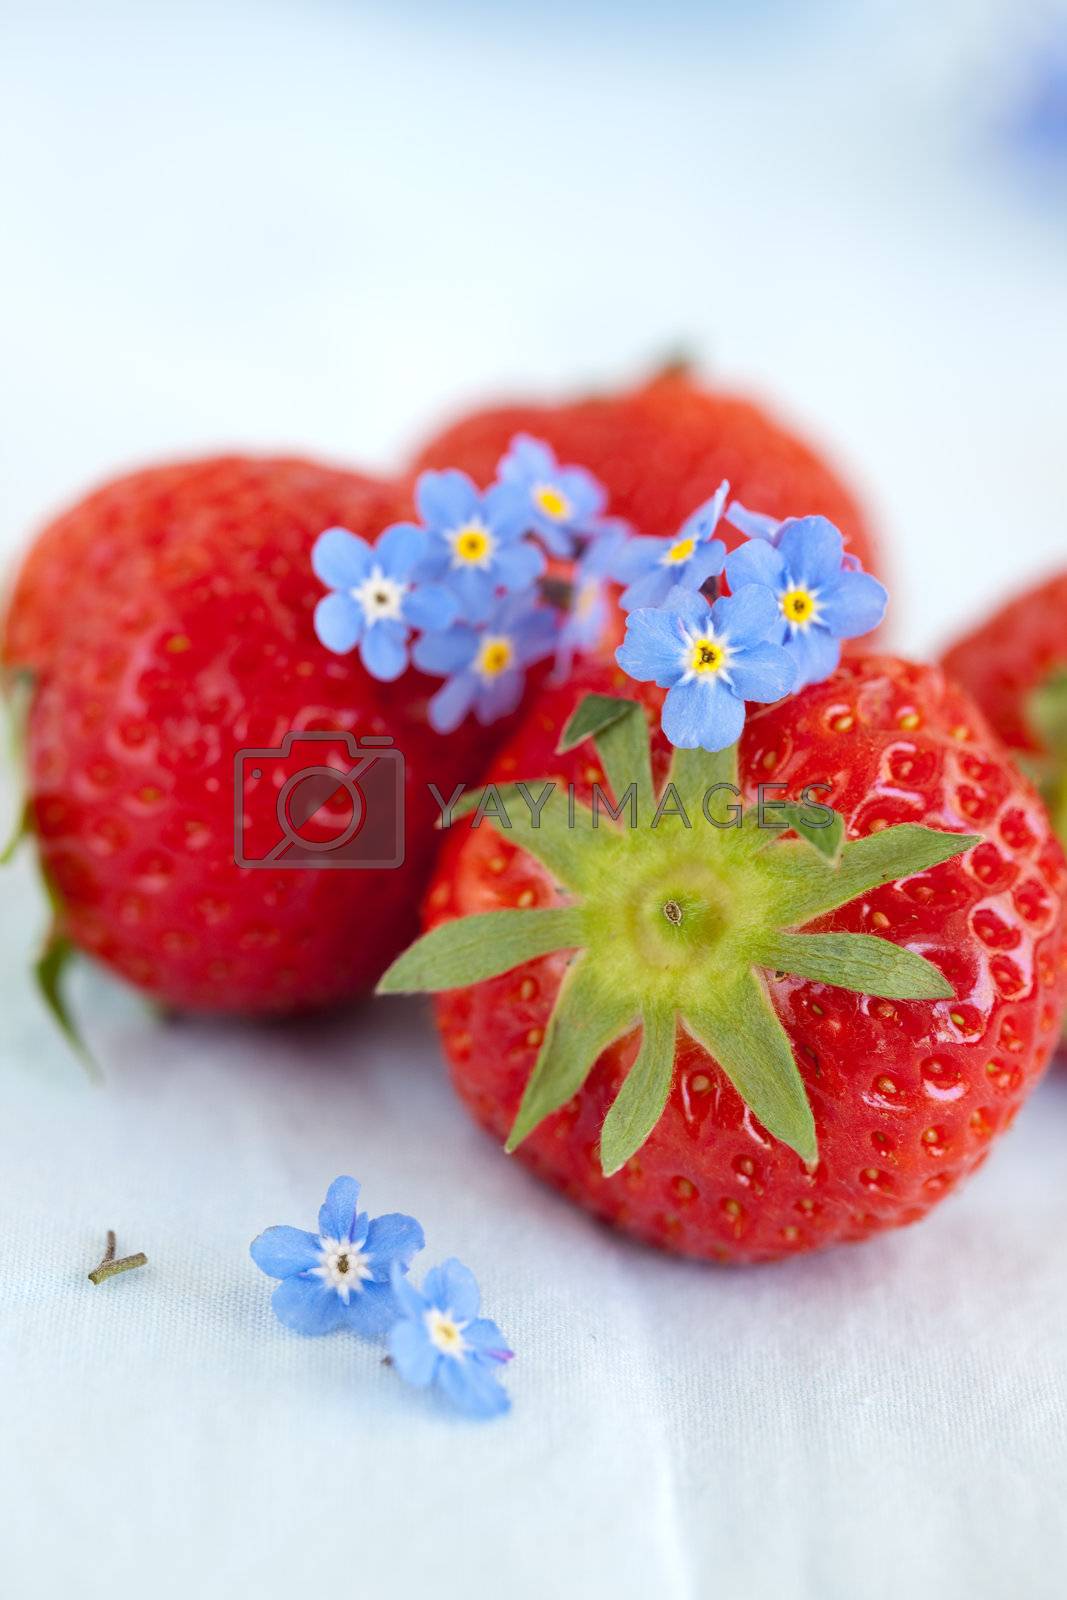 Royalty free image of Strawberries by Fotosmurf